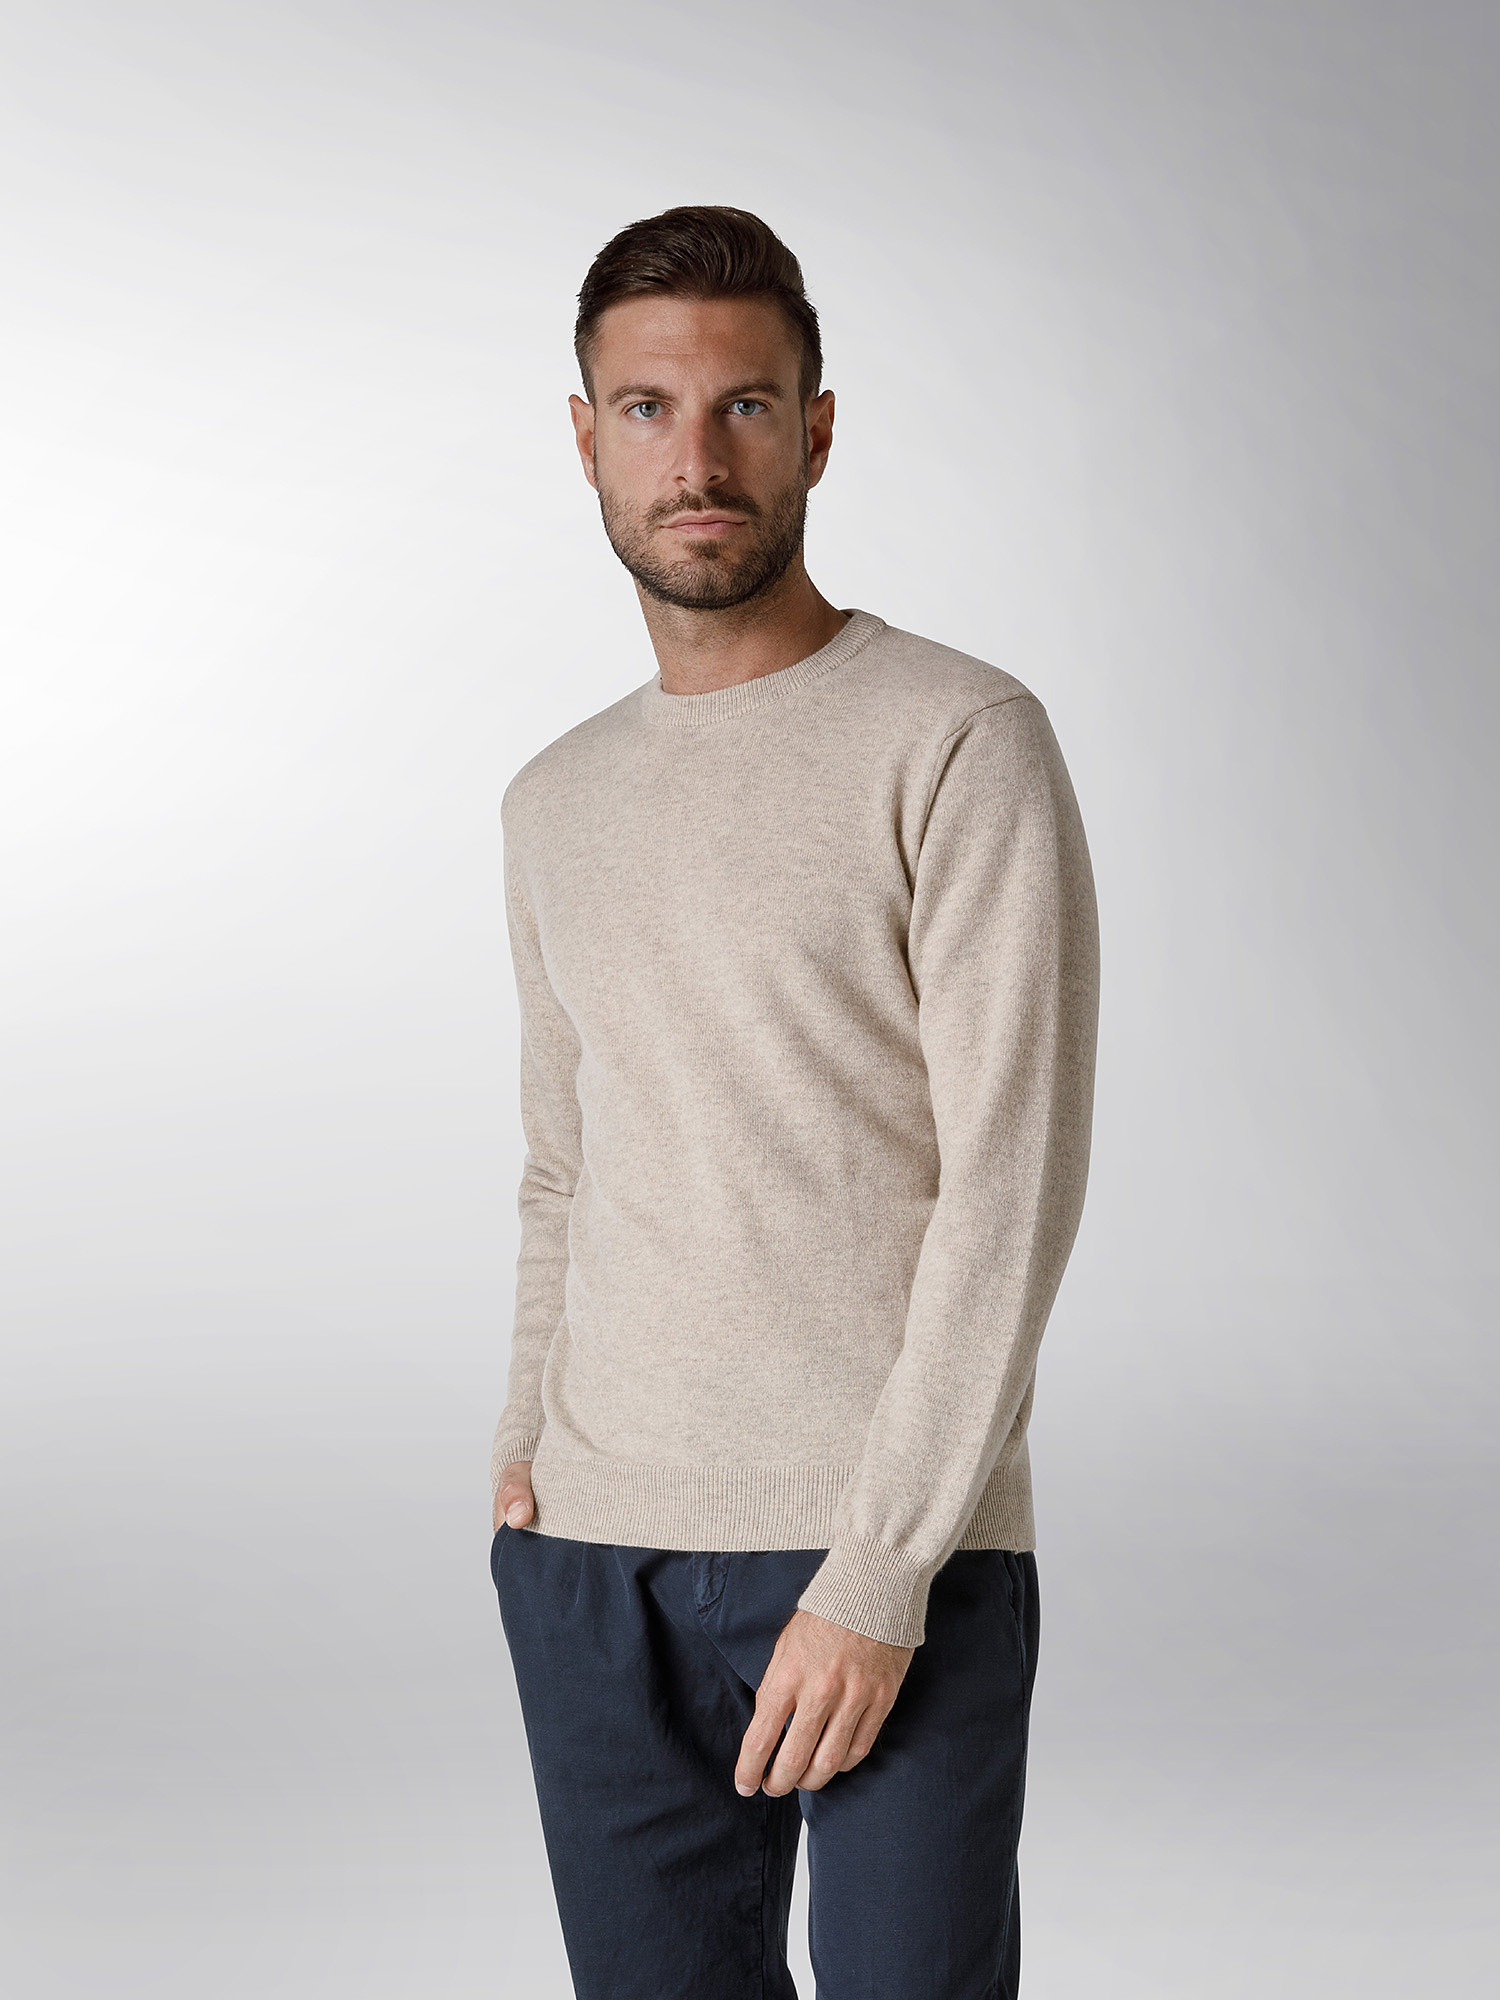 Coin Cashmere - Crewneck sweater in pure cashmere, Beige, large image number 1